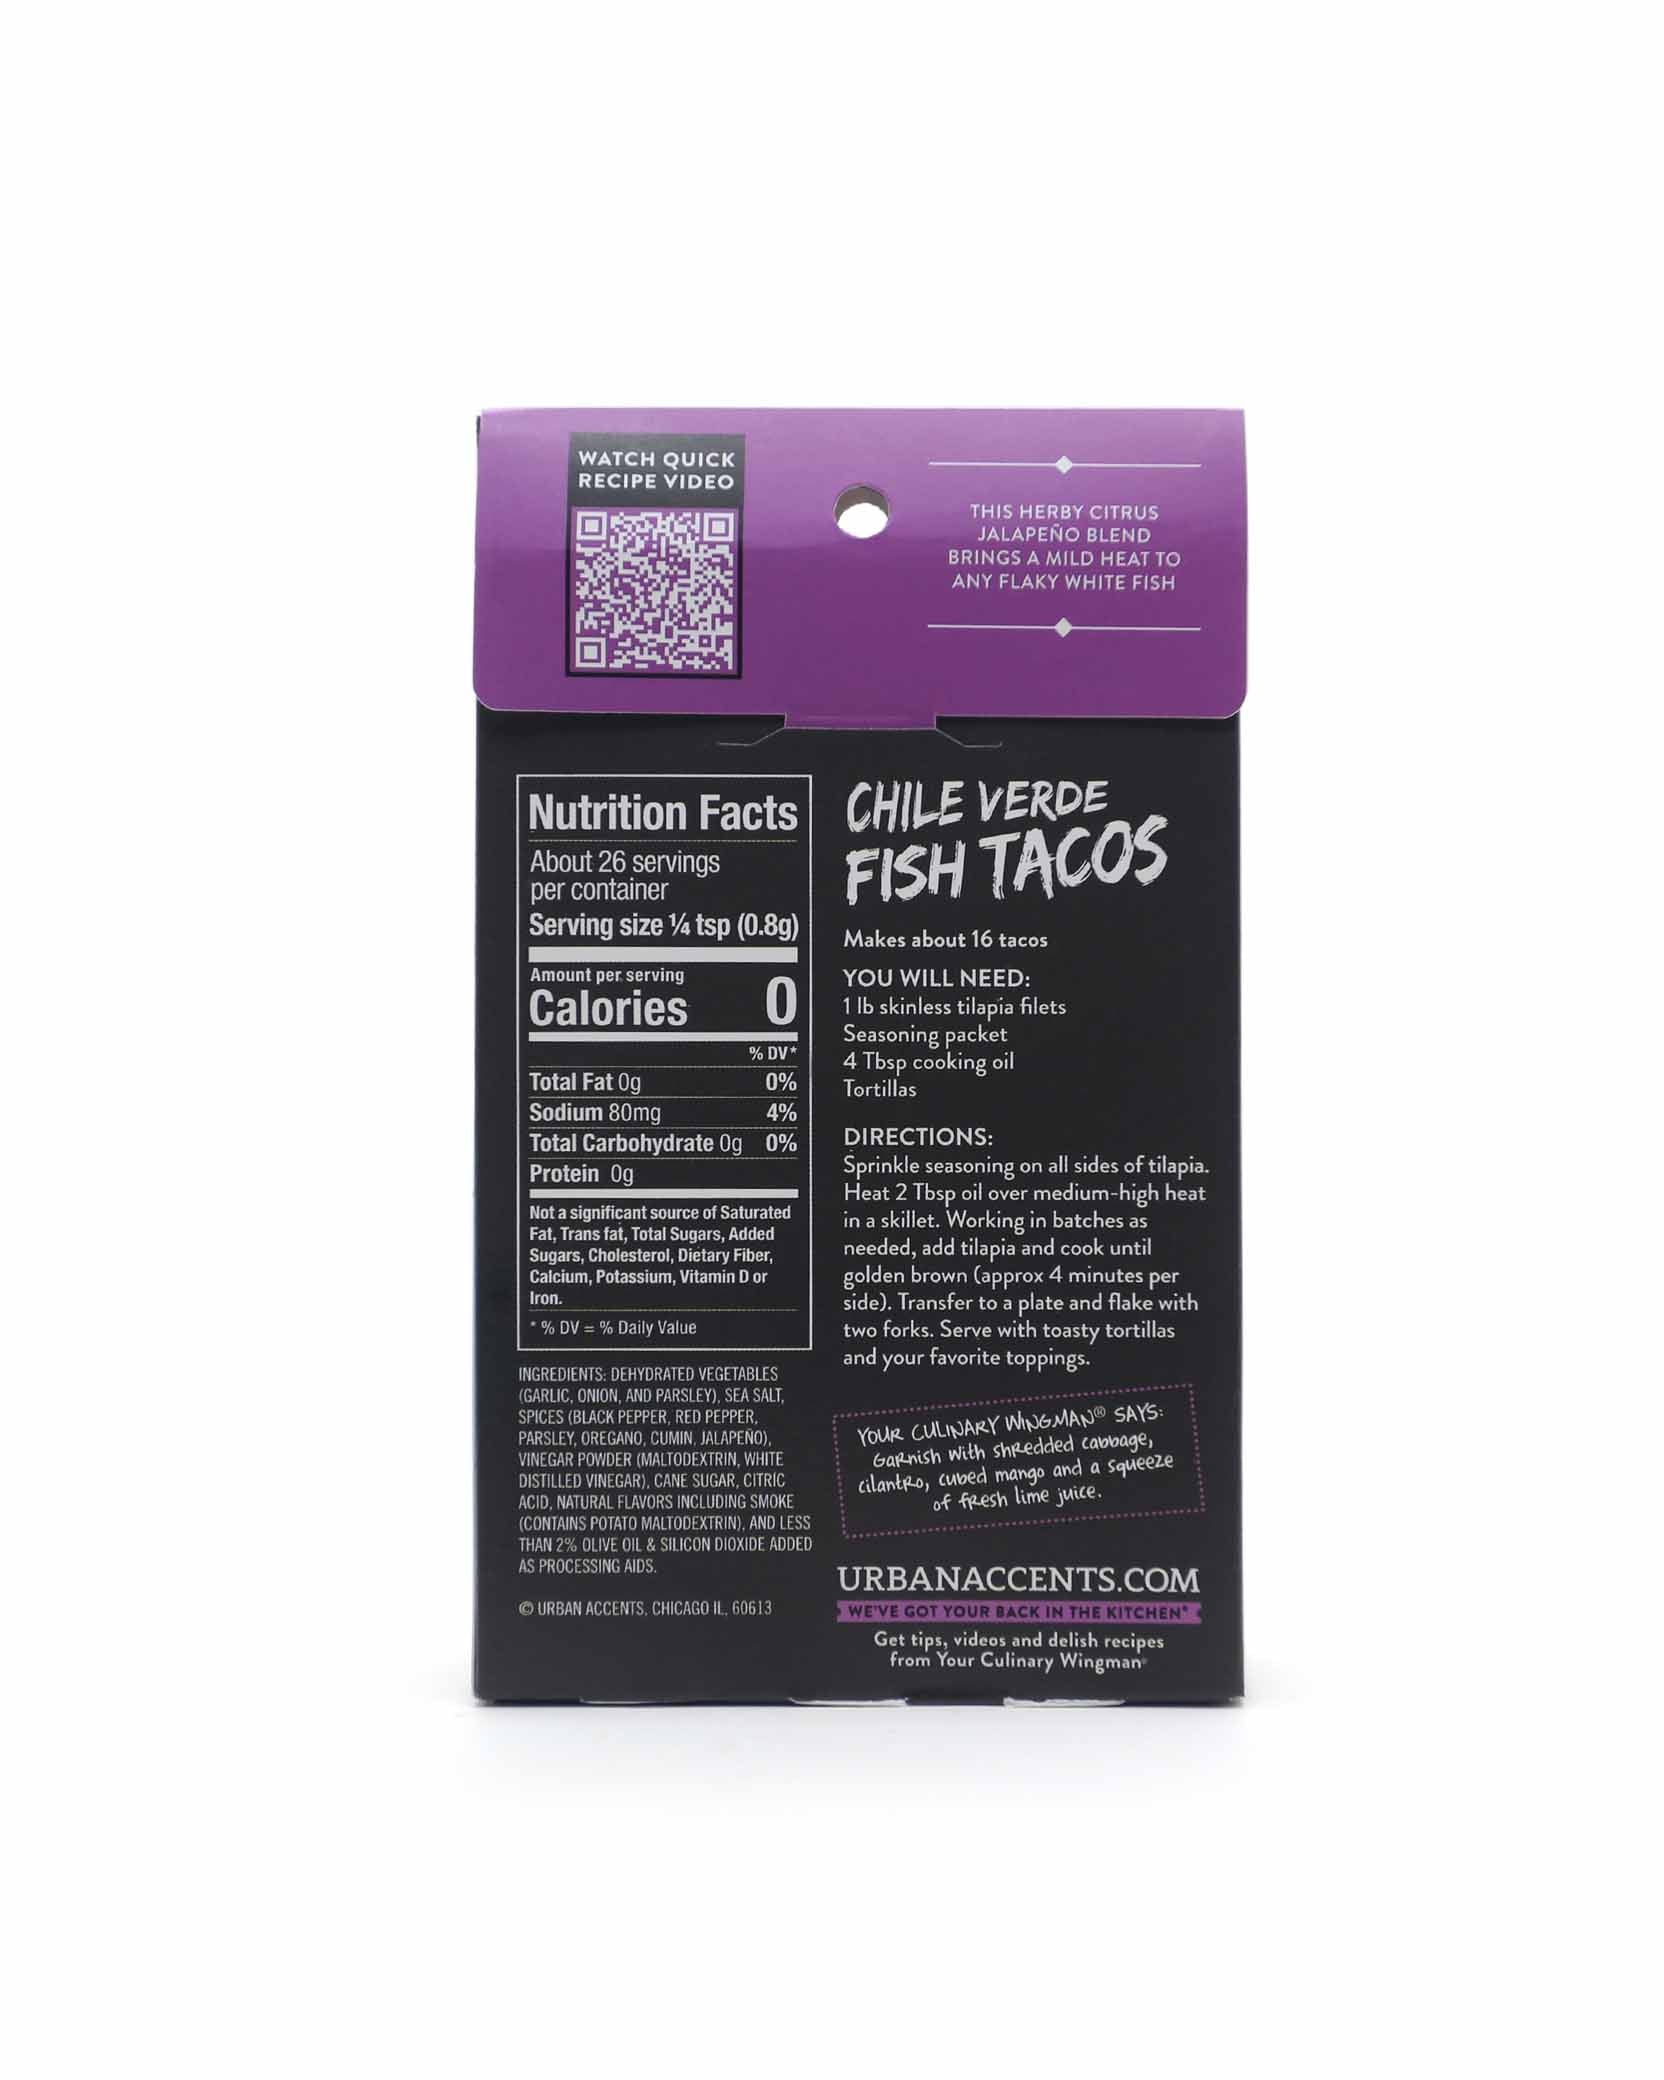 Chile Verde Fish Tacos Seasoning Mix - Olive Oil Etcetera - Bucks county's gourmet olive oil and vinegar shop